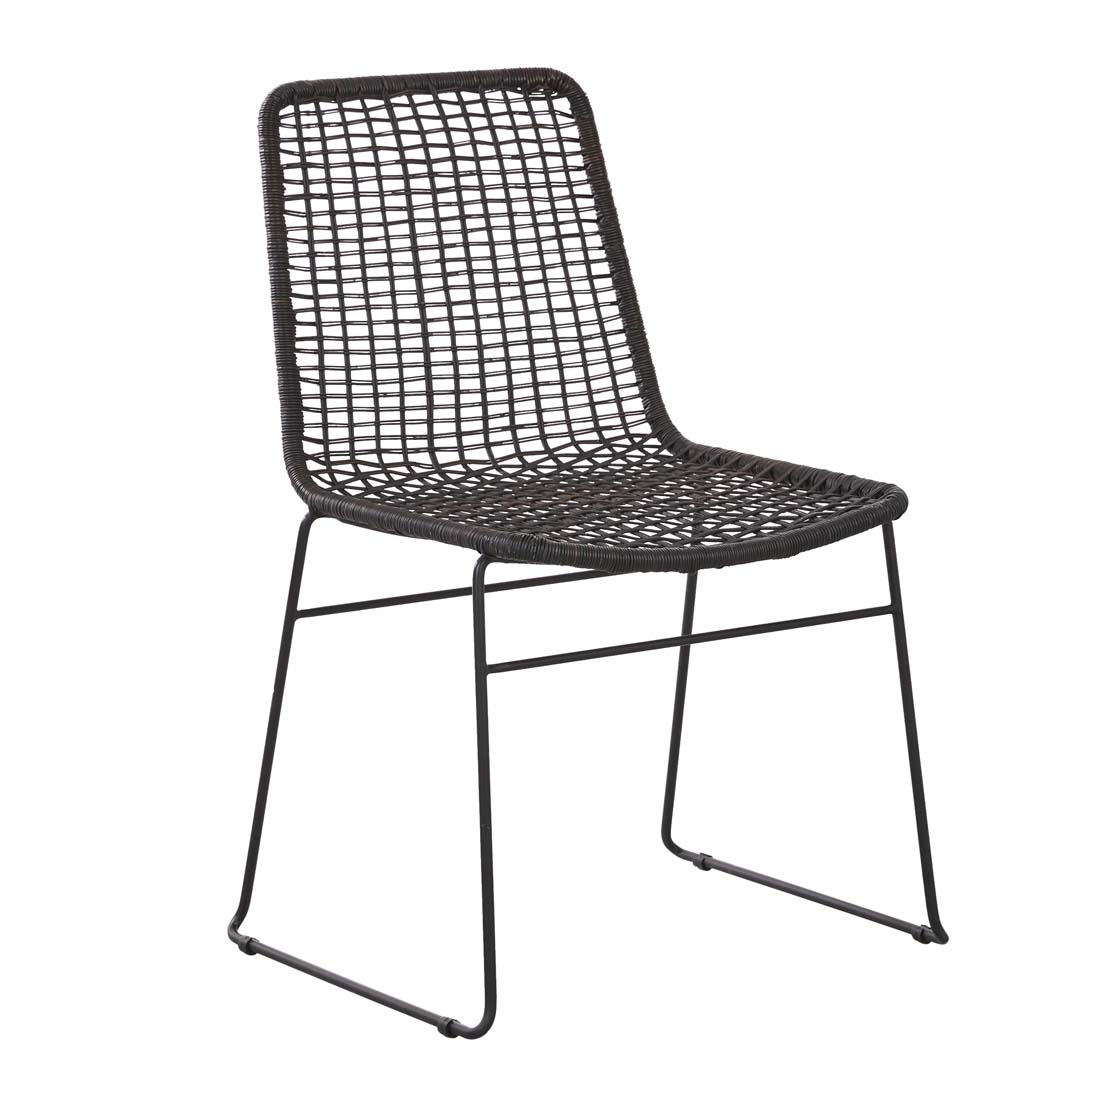 Olivia Open Weave Dining Chair image 7